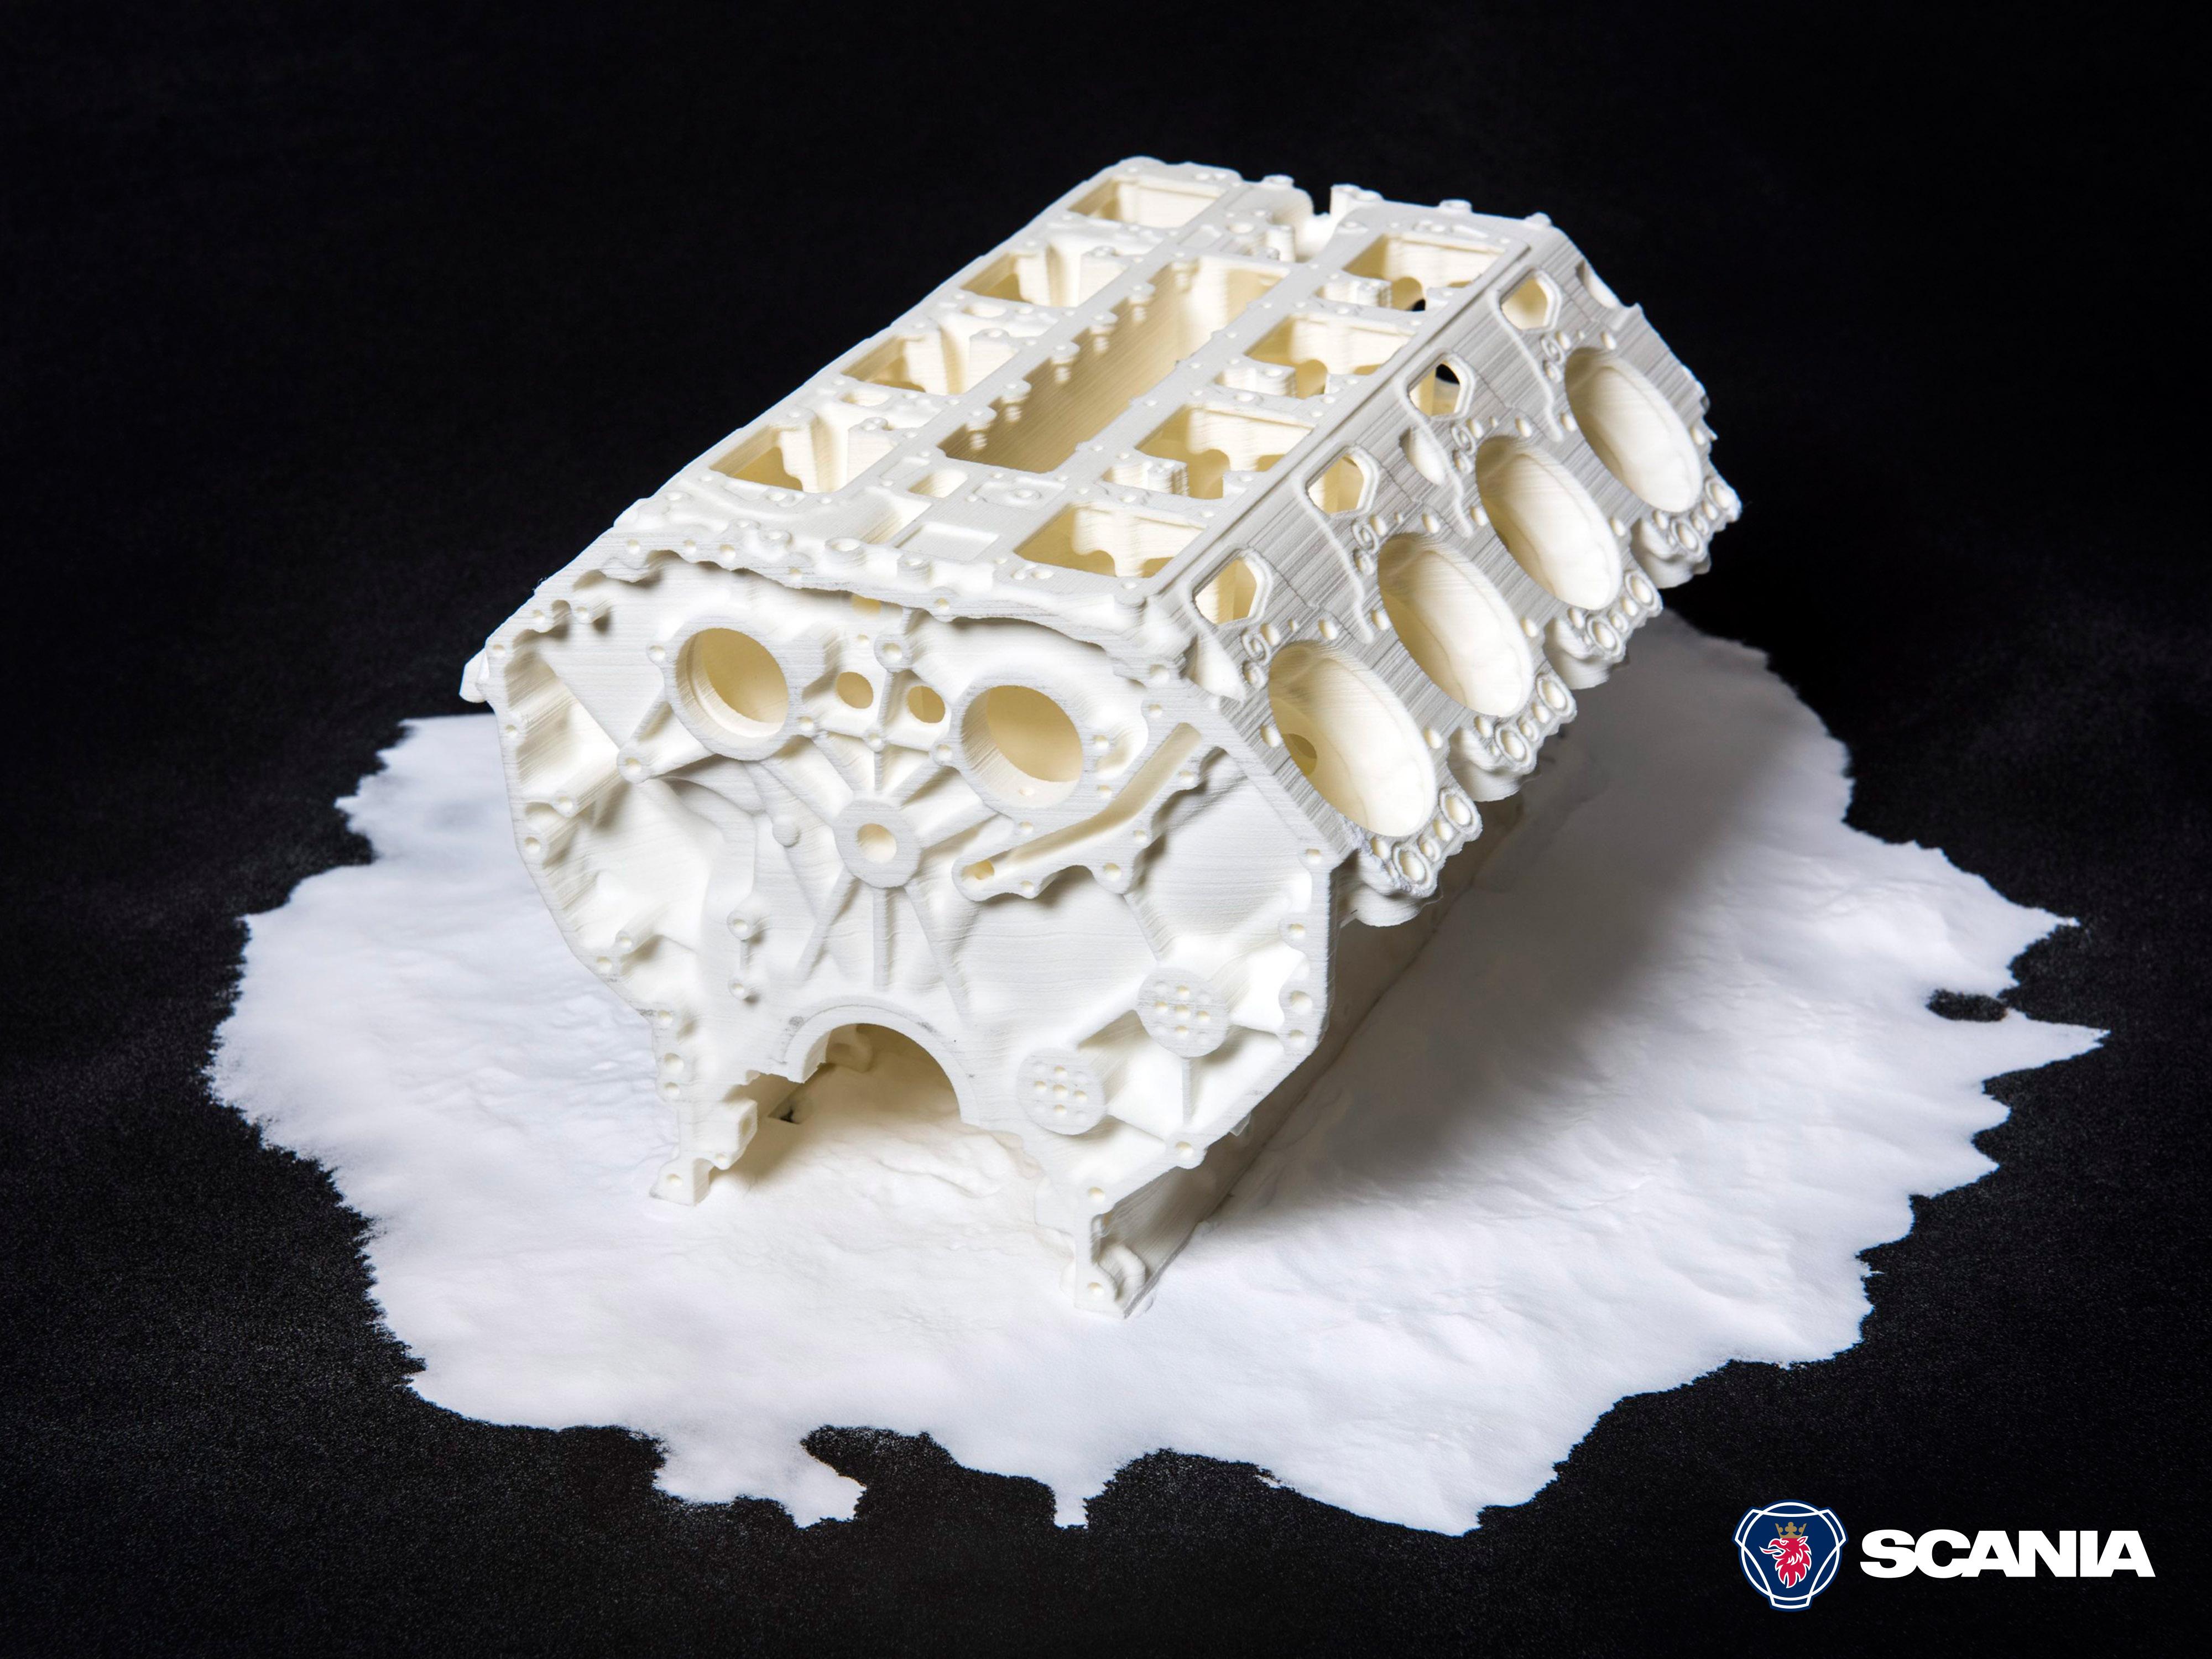 Twitter 上的Scania UK："A 3D print of a V8 engine. Find out how we use to prototype new #Scania designs http://t.co/smOHIMUS7T http://t.co/VSJSulbChS" / Twitter